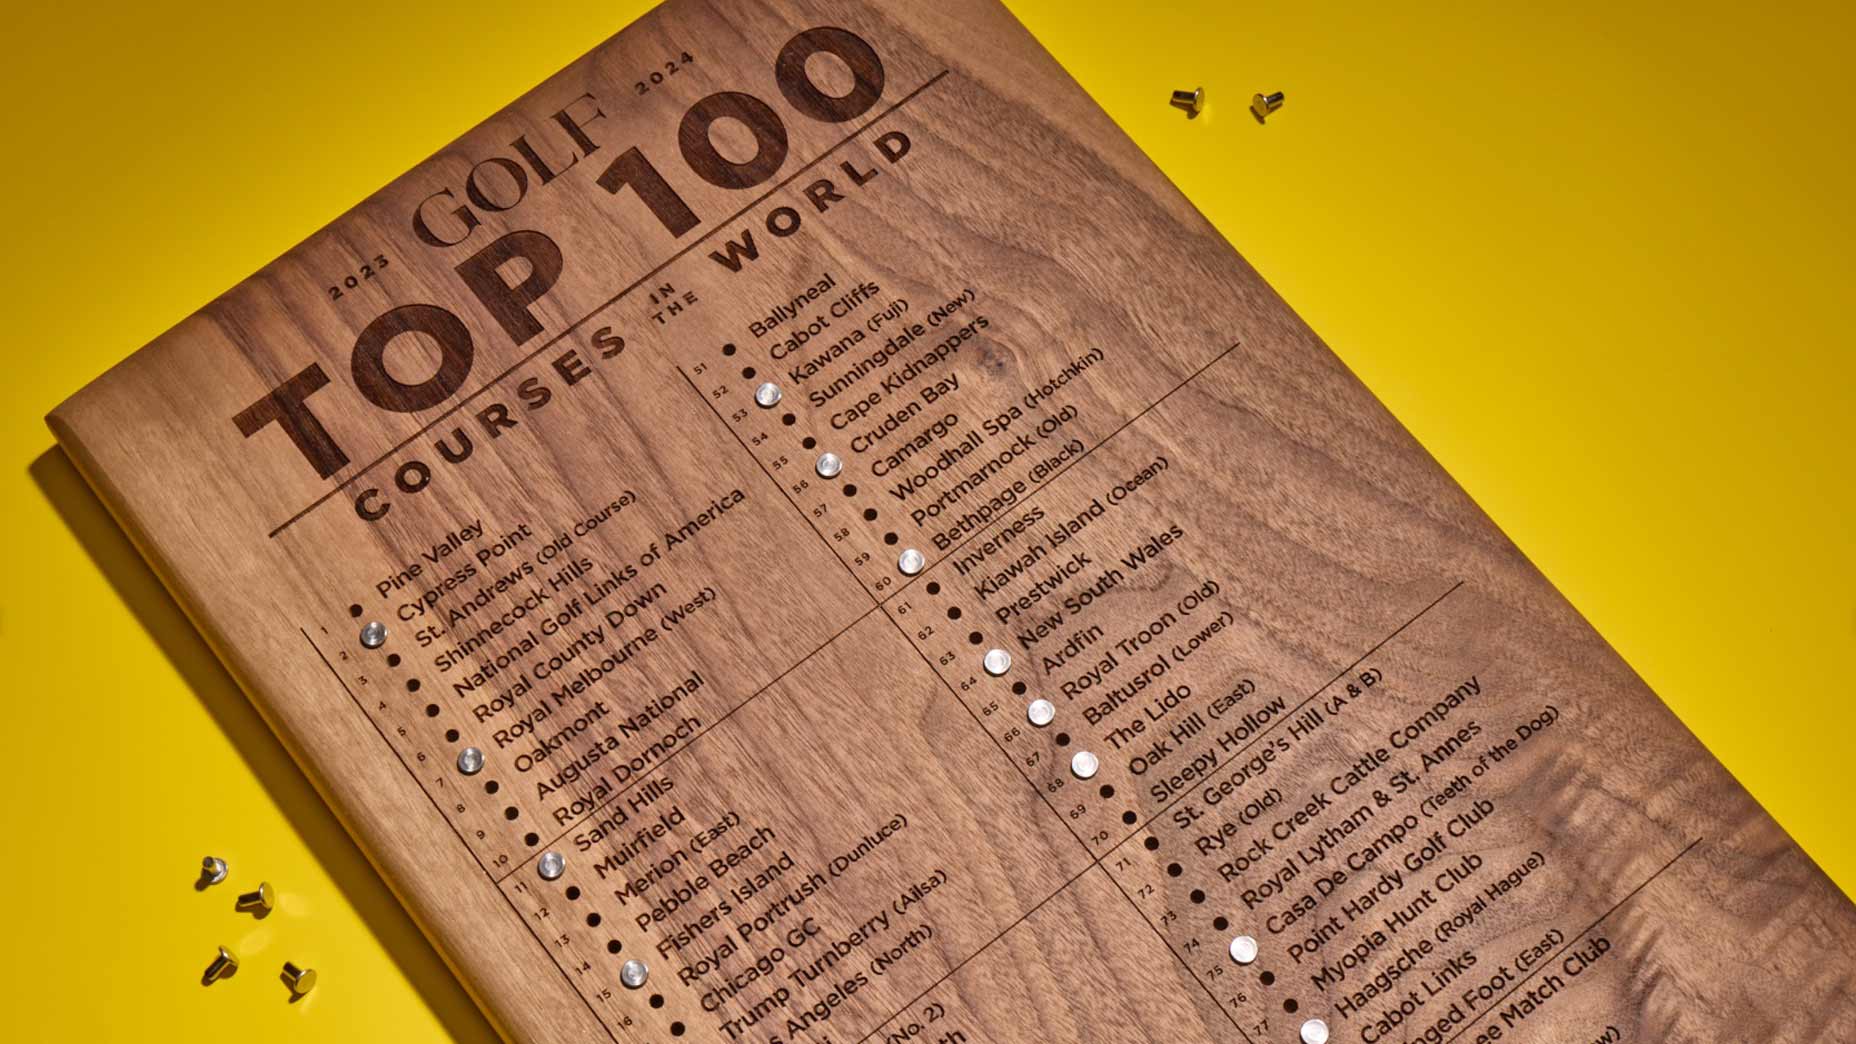 GOLF Top 100 Course pegboard pictured against yellow background